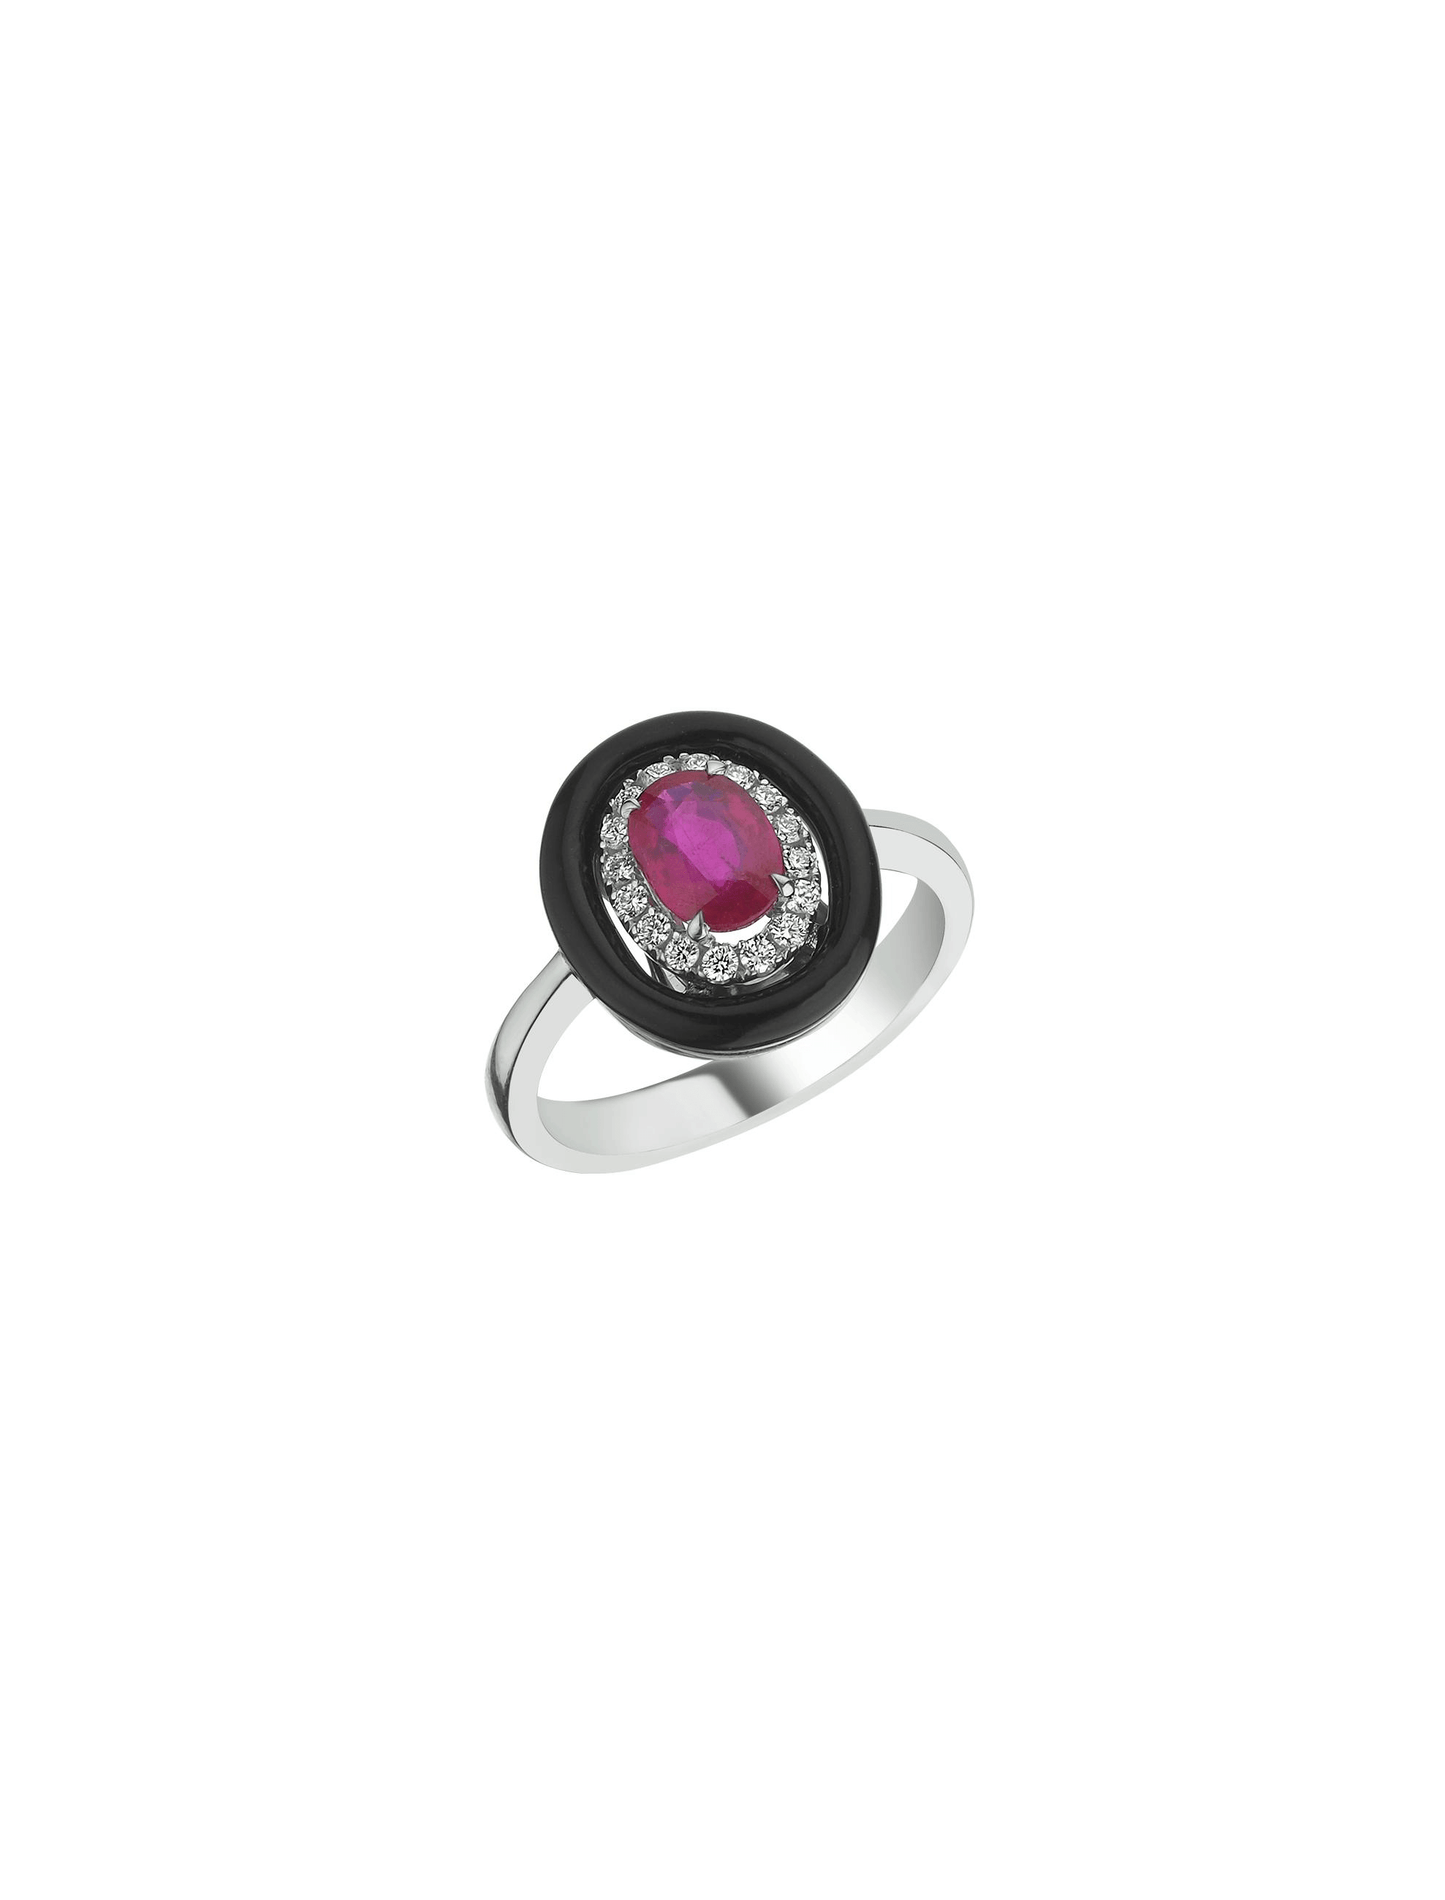 Ruby and Enamel Ring